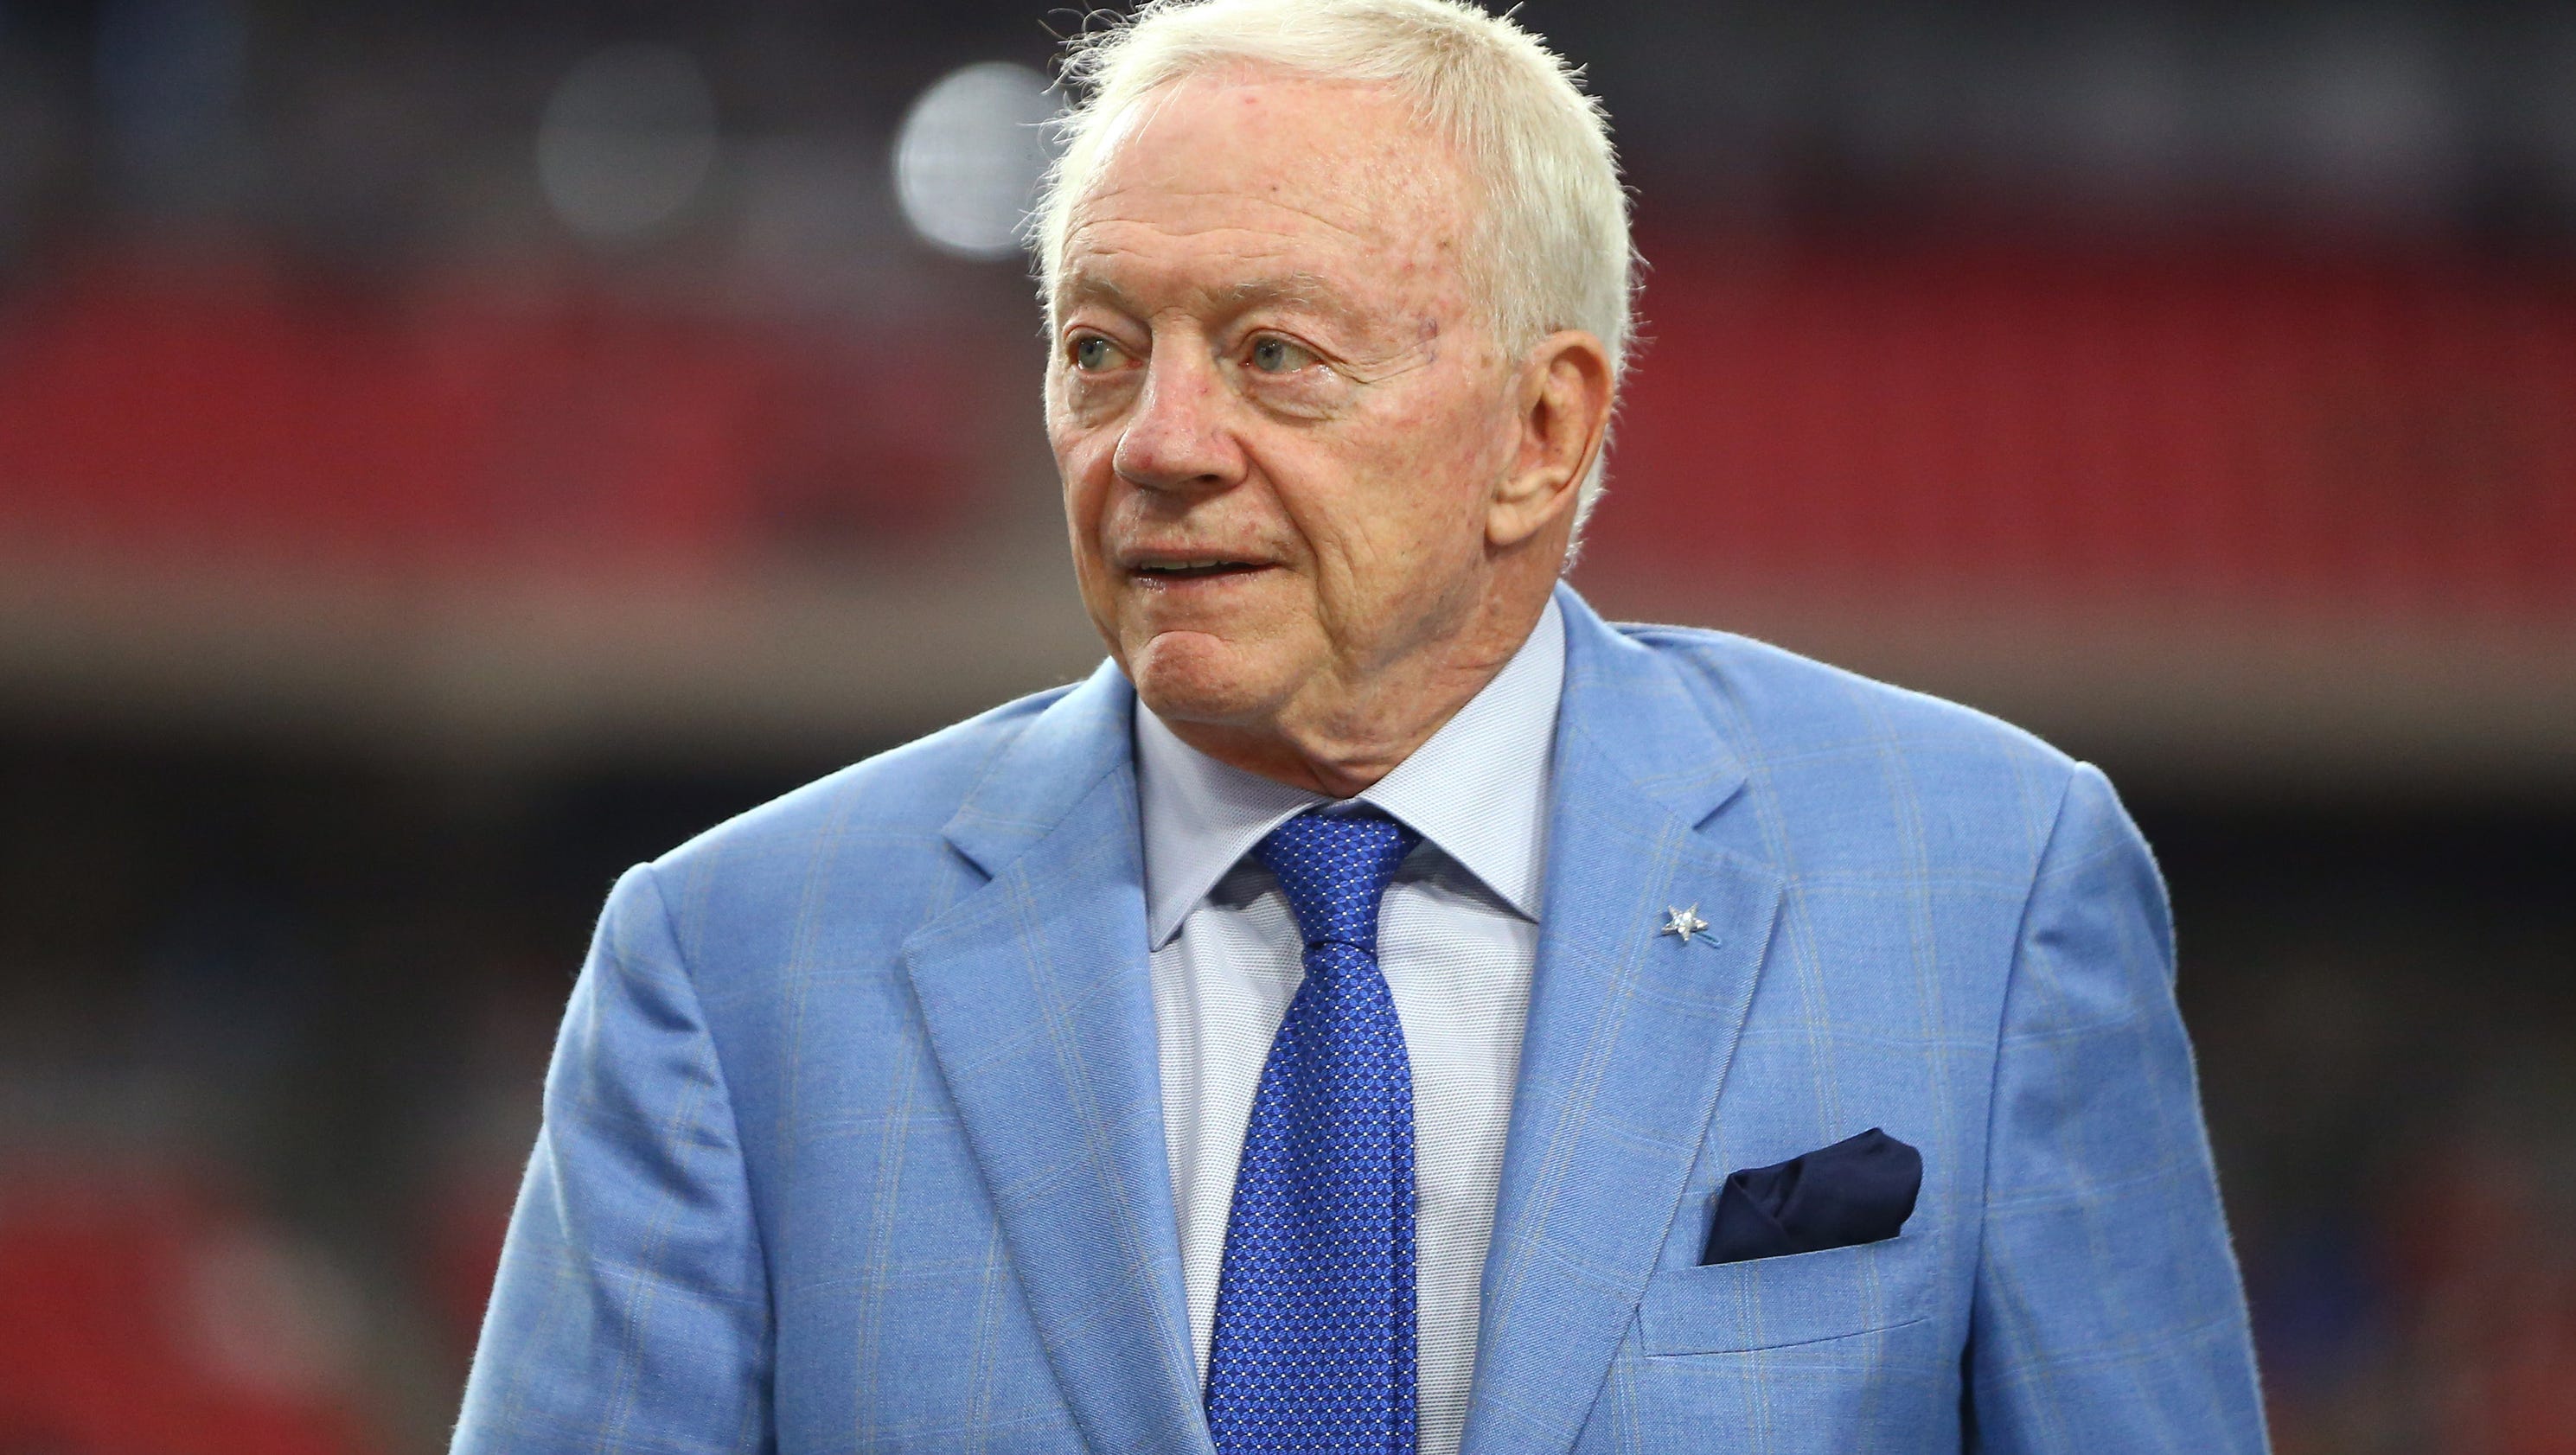 NFL compensation committee denies Jerry Jones' request to review Roger Goodell's contract